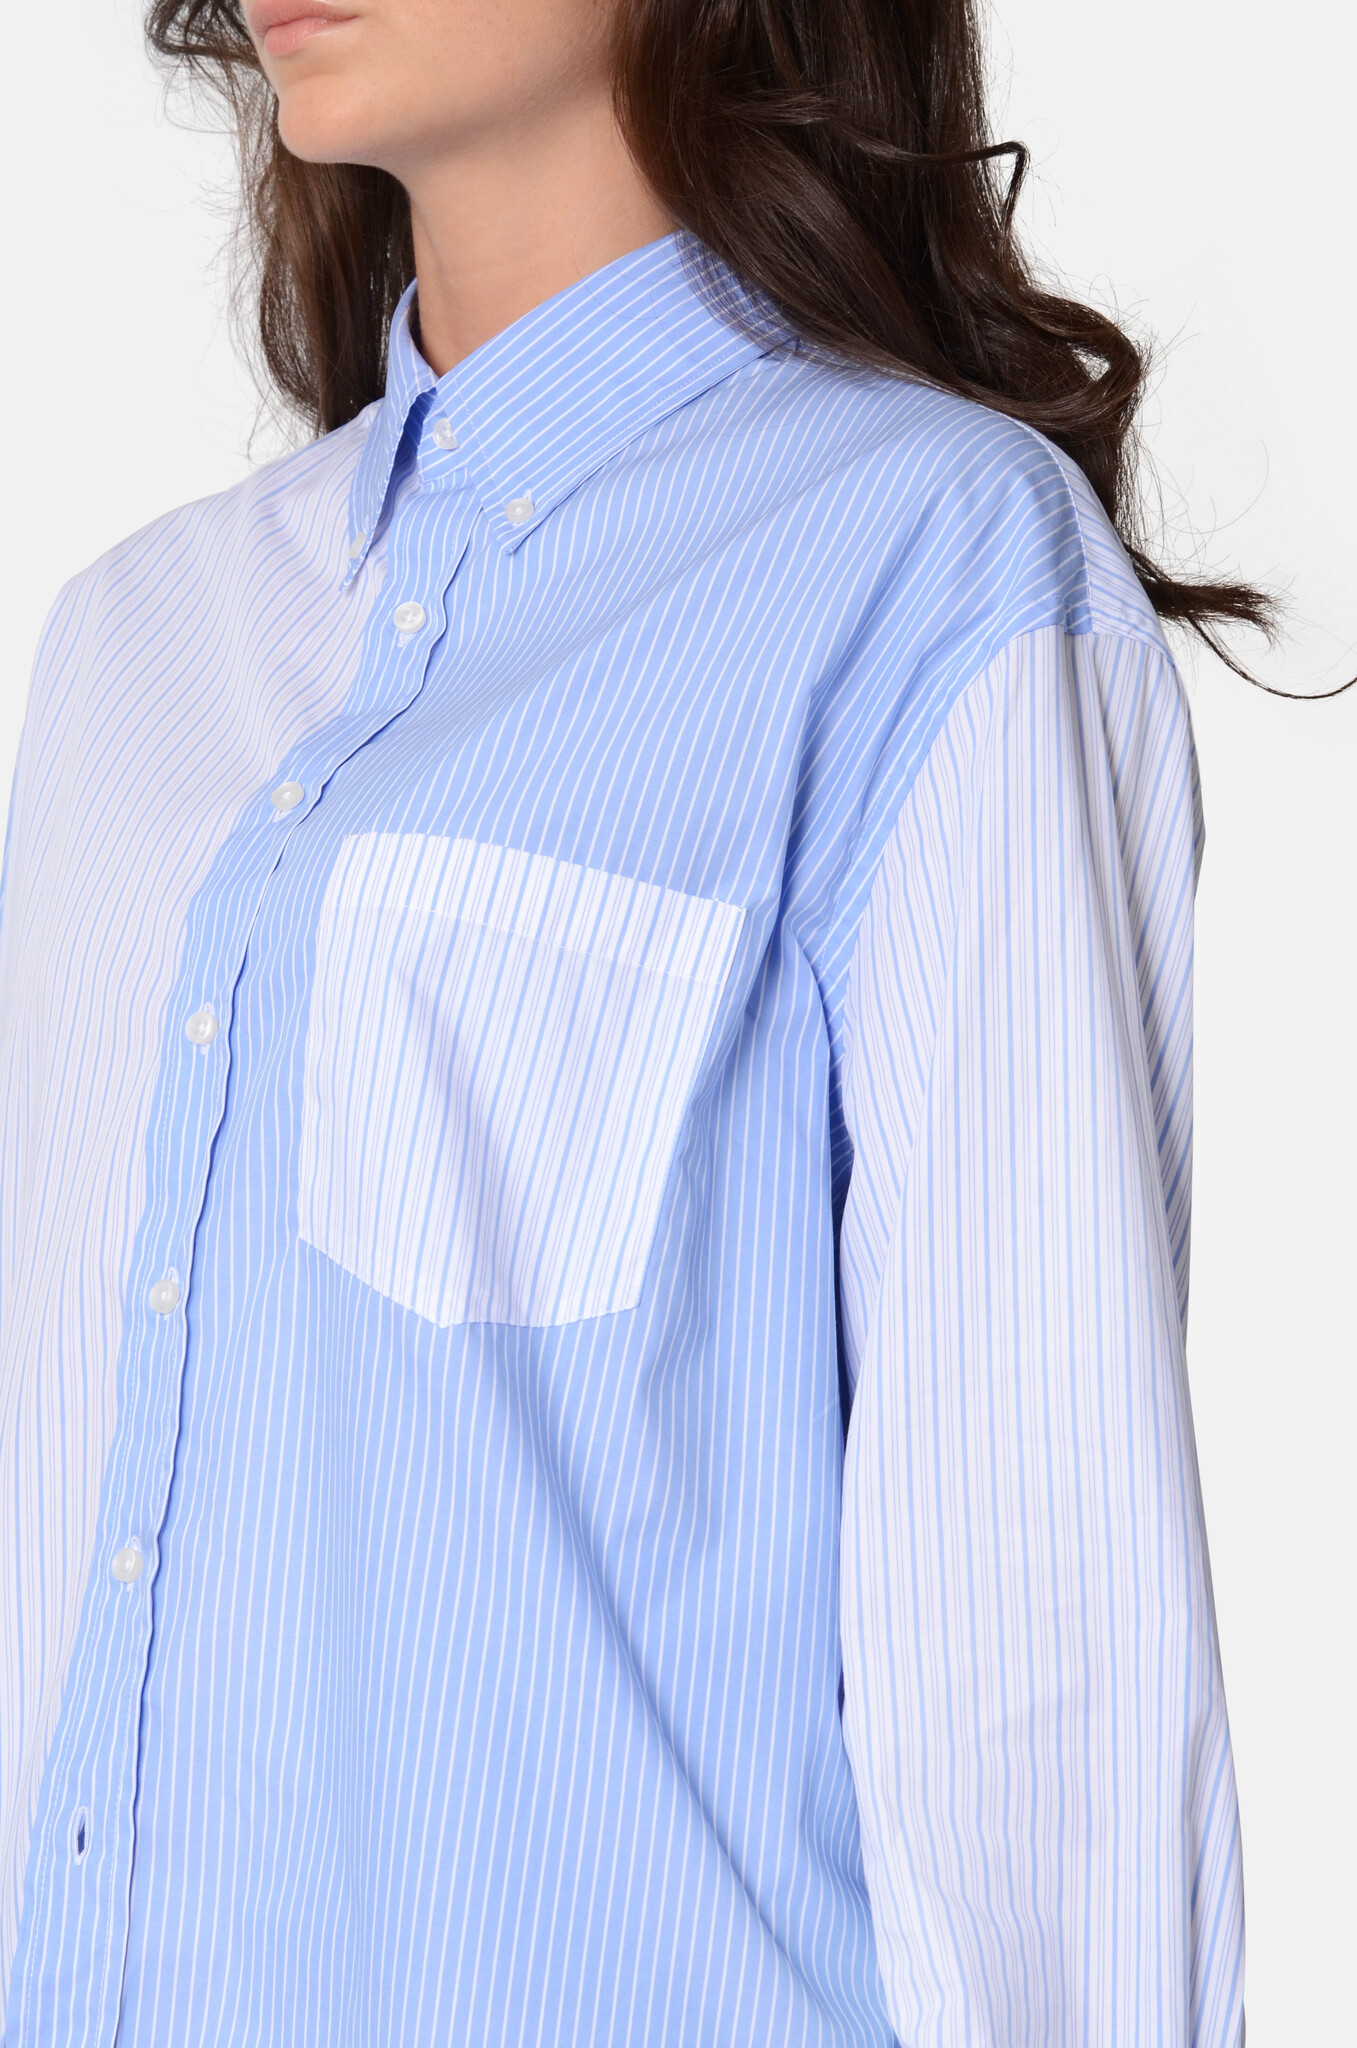 Double Popelline shirt with Stripes-5